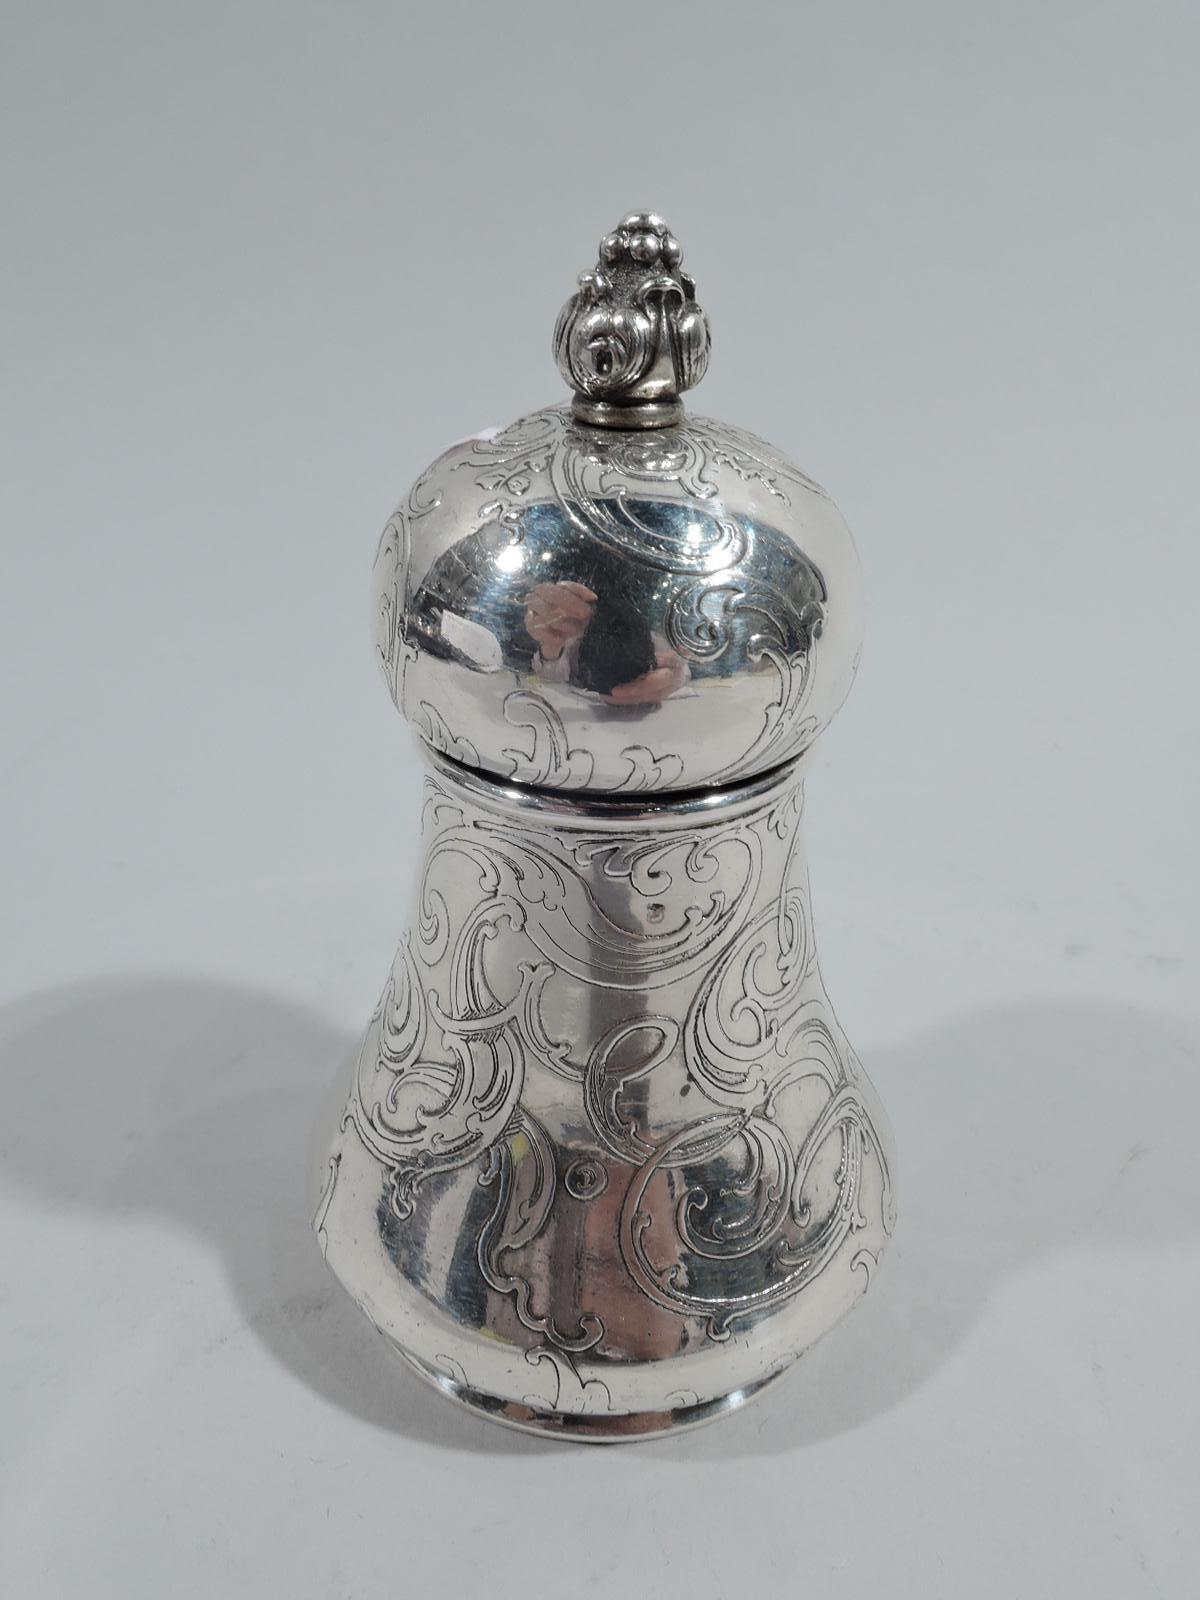 Gorgeous Art Nouveau sterling silver pepper mill. Made by Tiffany & Co. in New York. Round with spread base and round and rotating cover with bud finial. Acid-etched ornament with loose scrolls entwined in stylistically integrated monogram. Fully